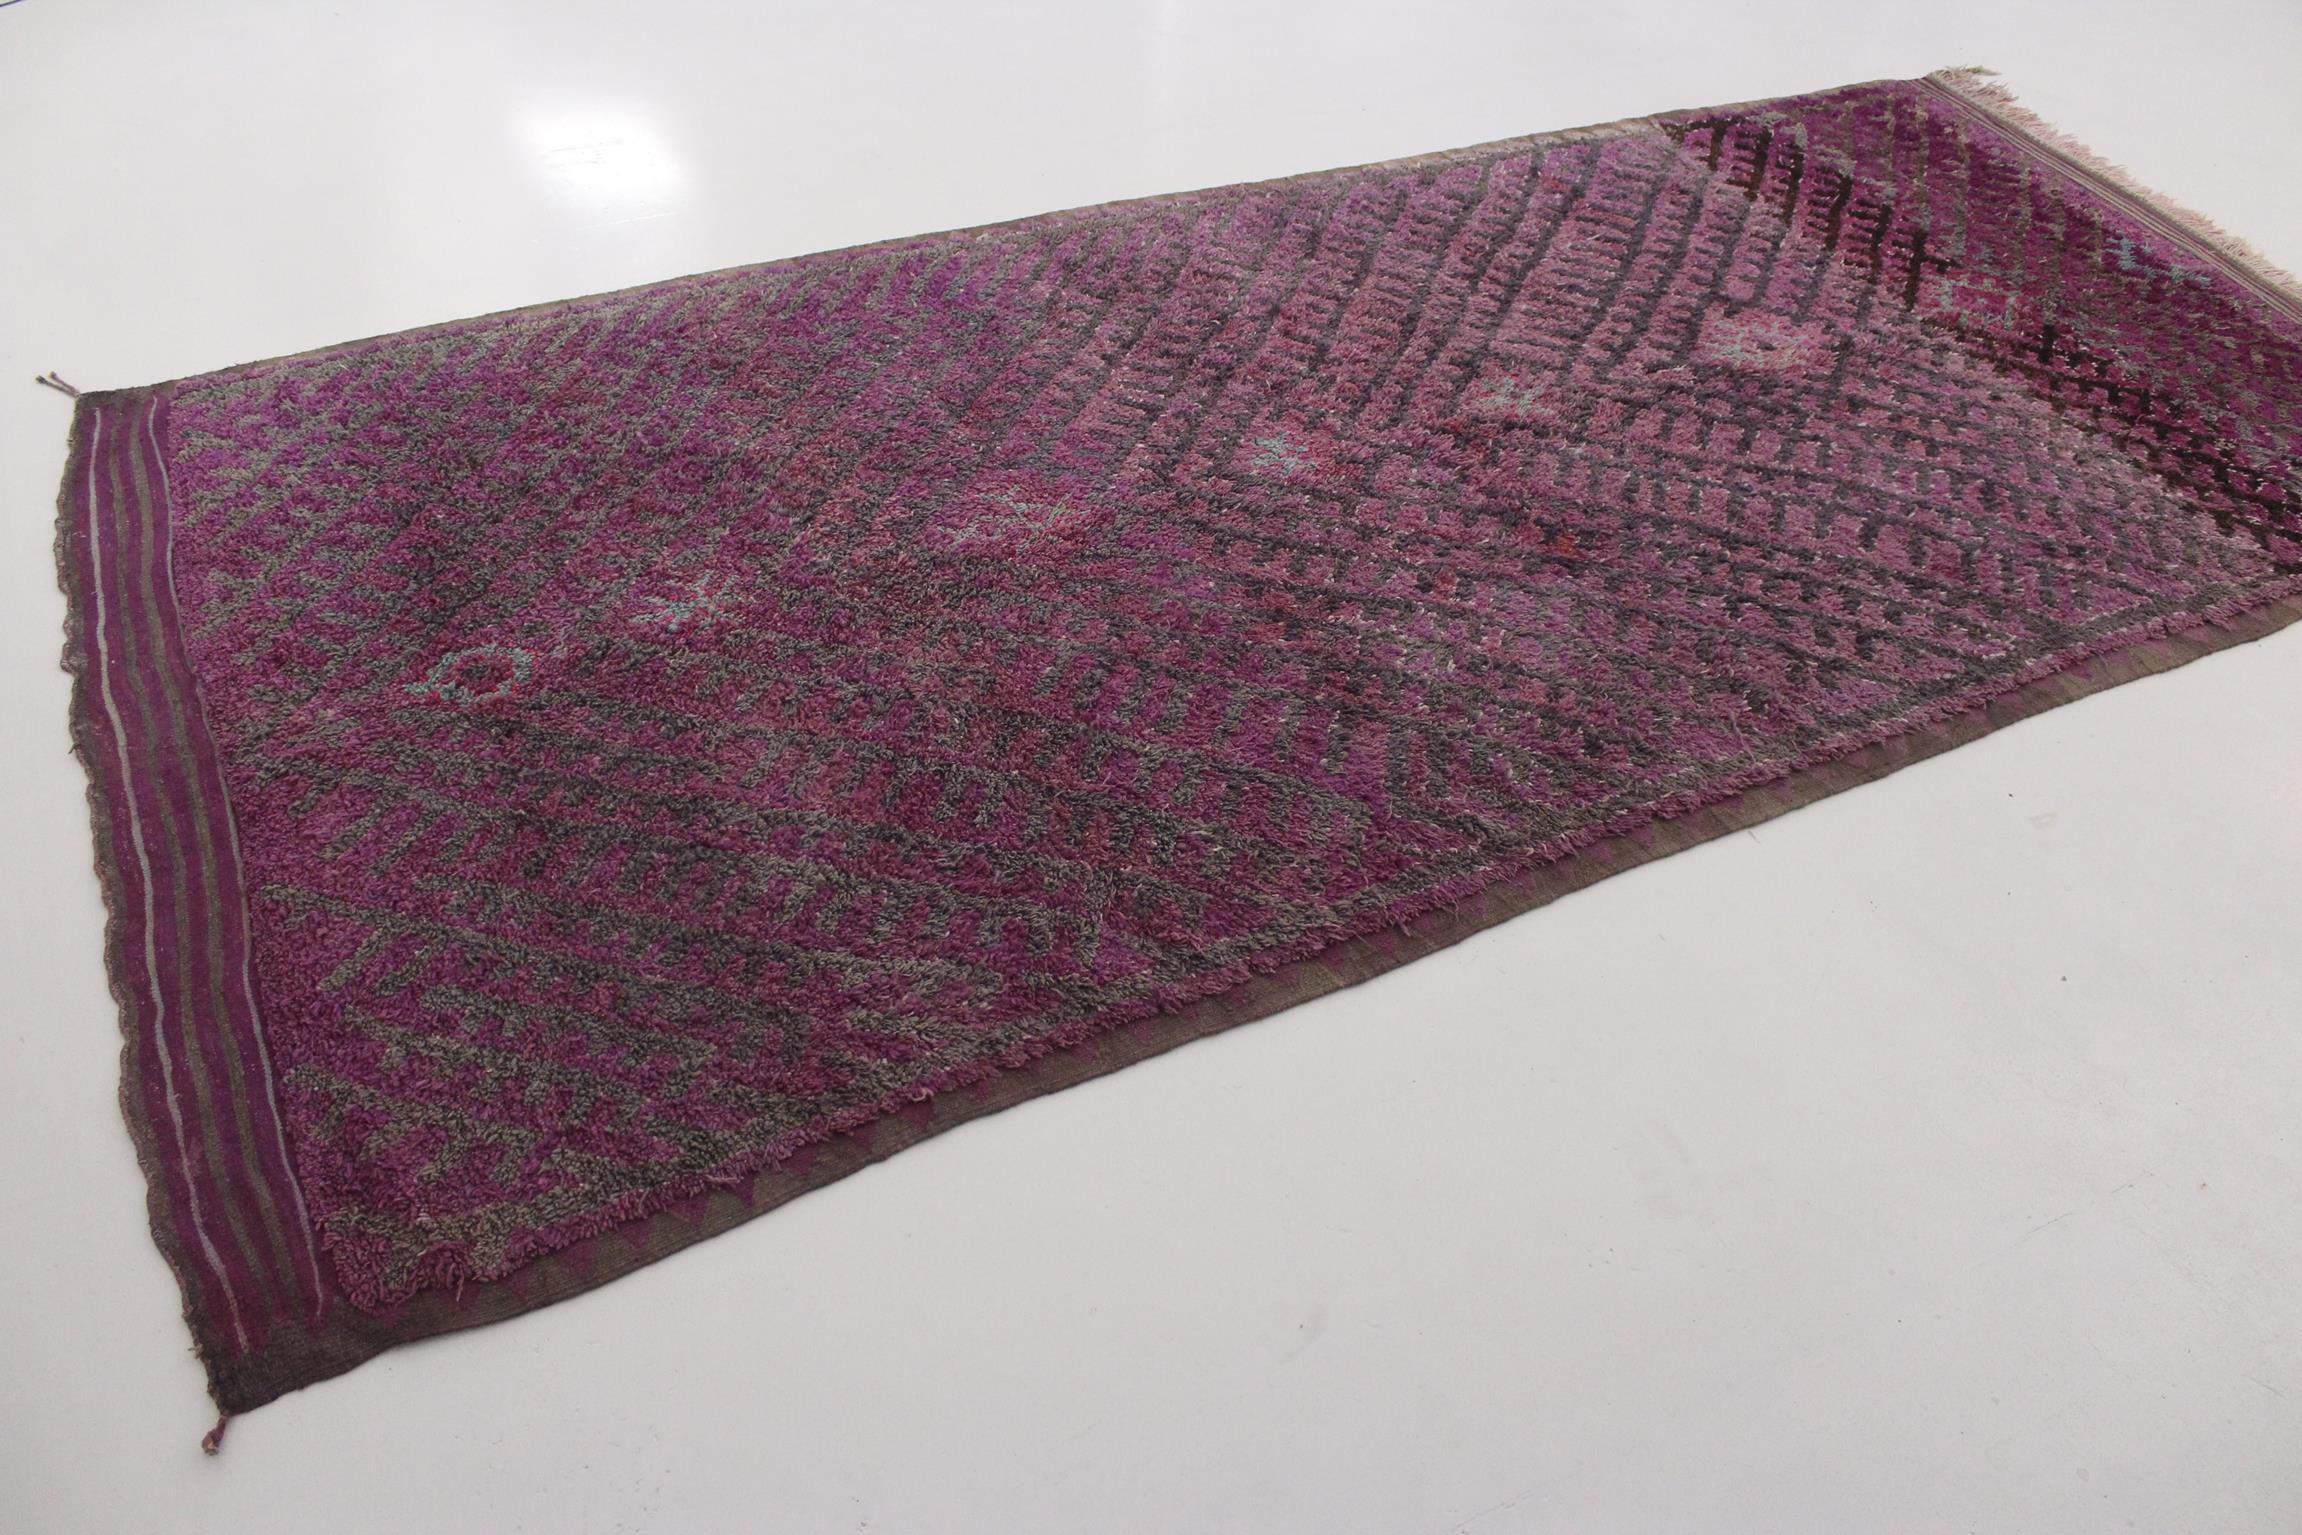 Hand-Woven Vintage Moroccan Talsint rug - Purple - 6.5x14.5feet / 200x442cm For Sale